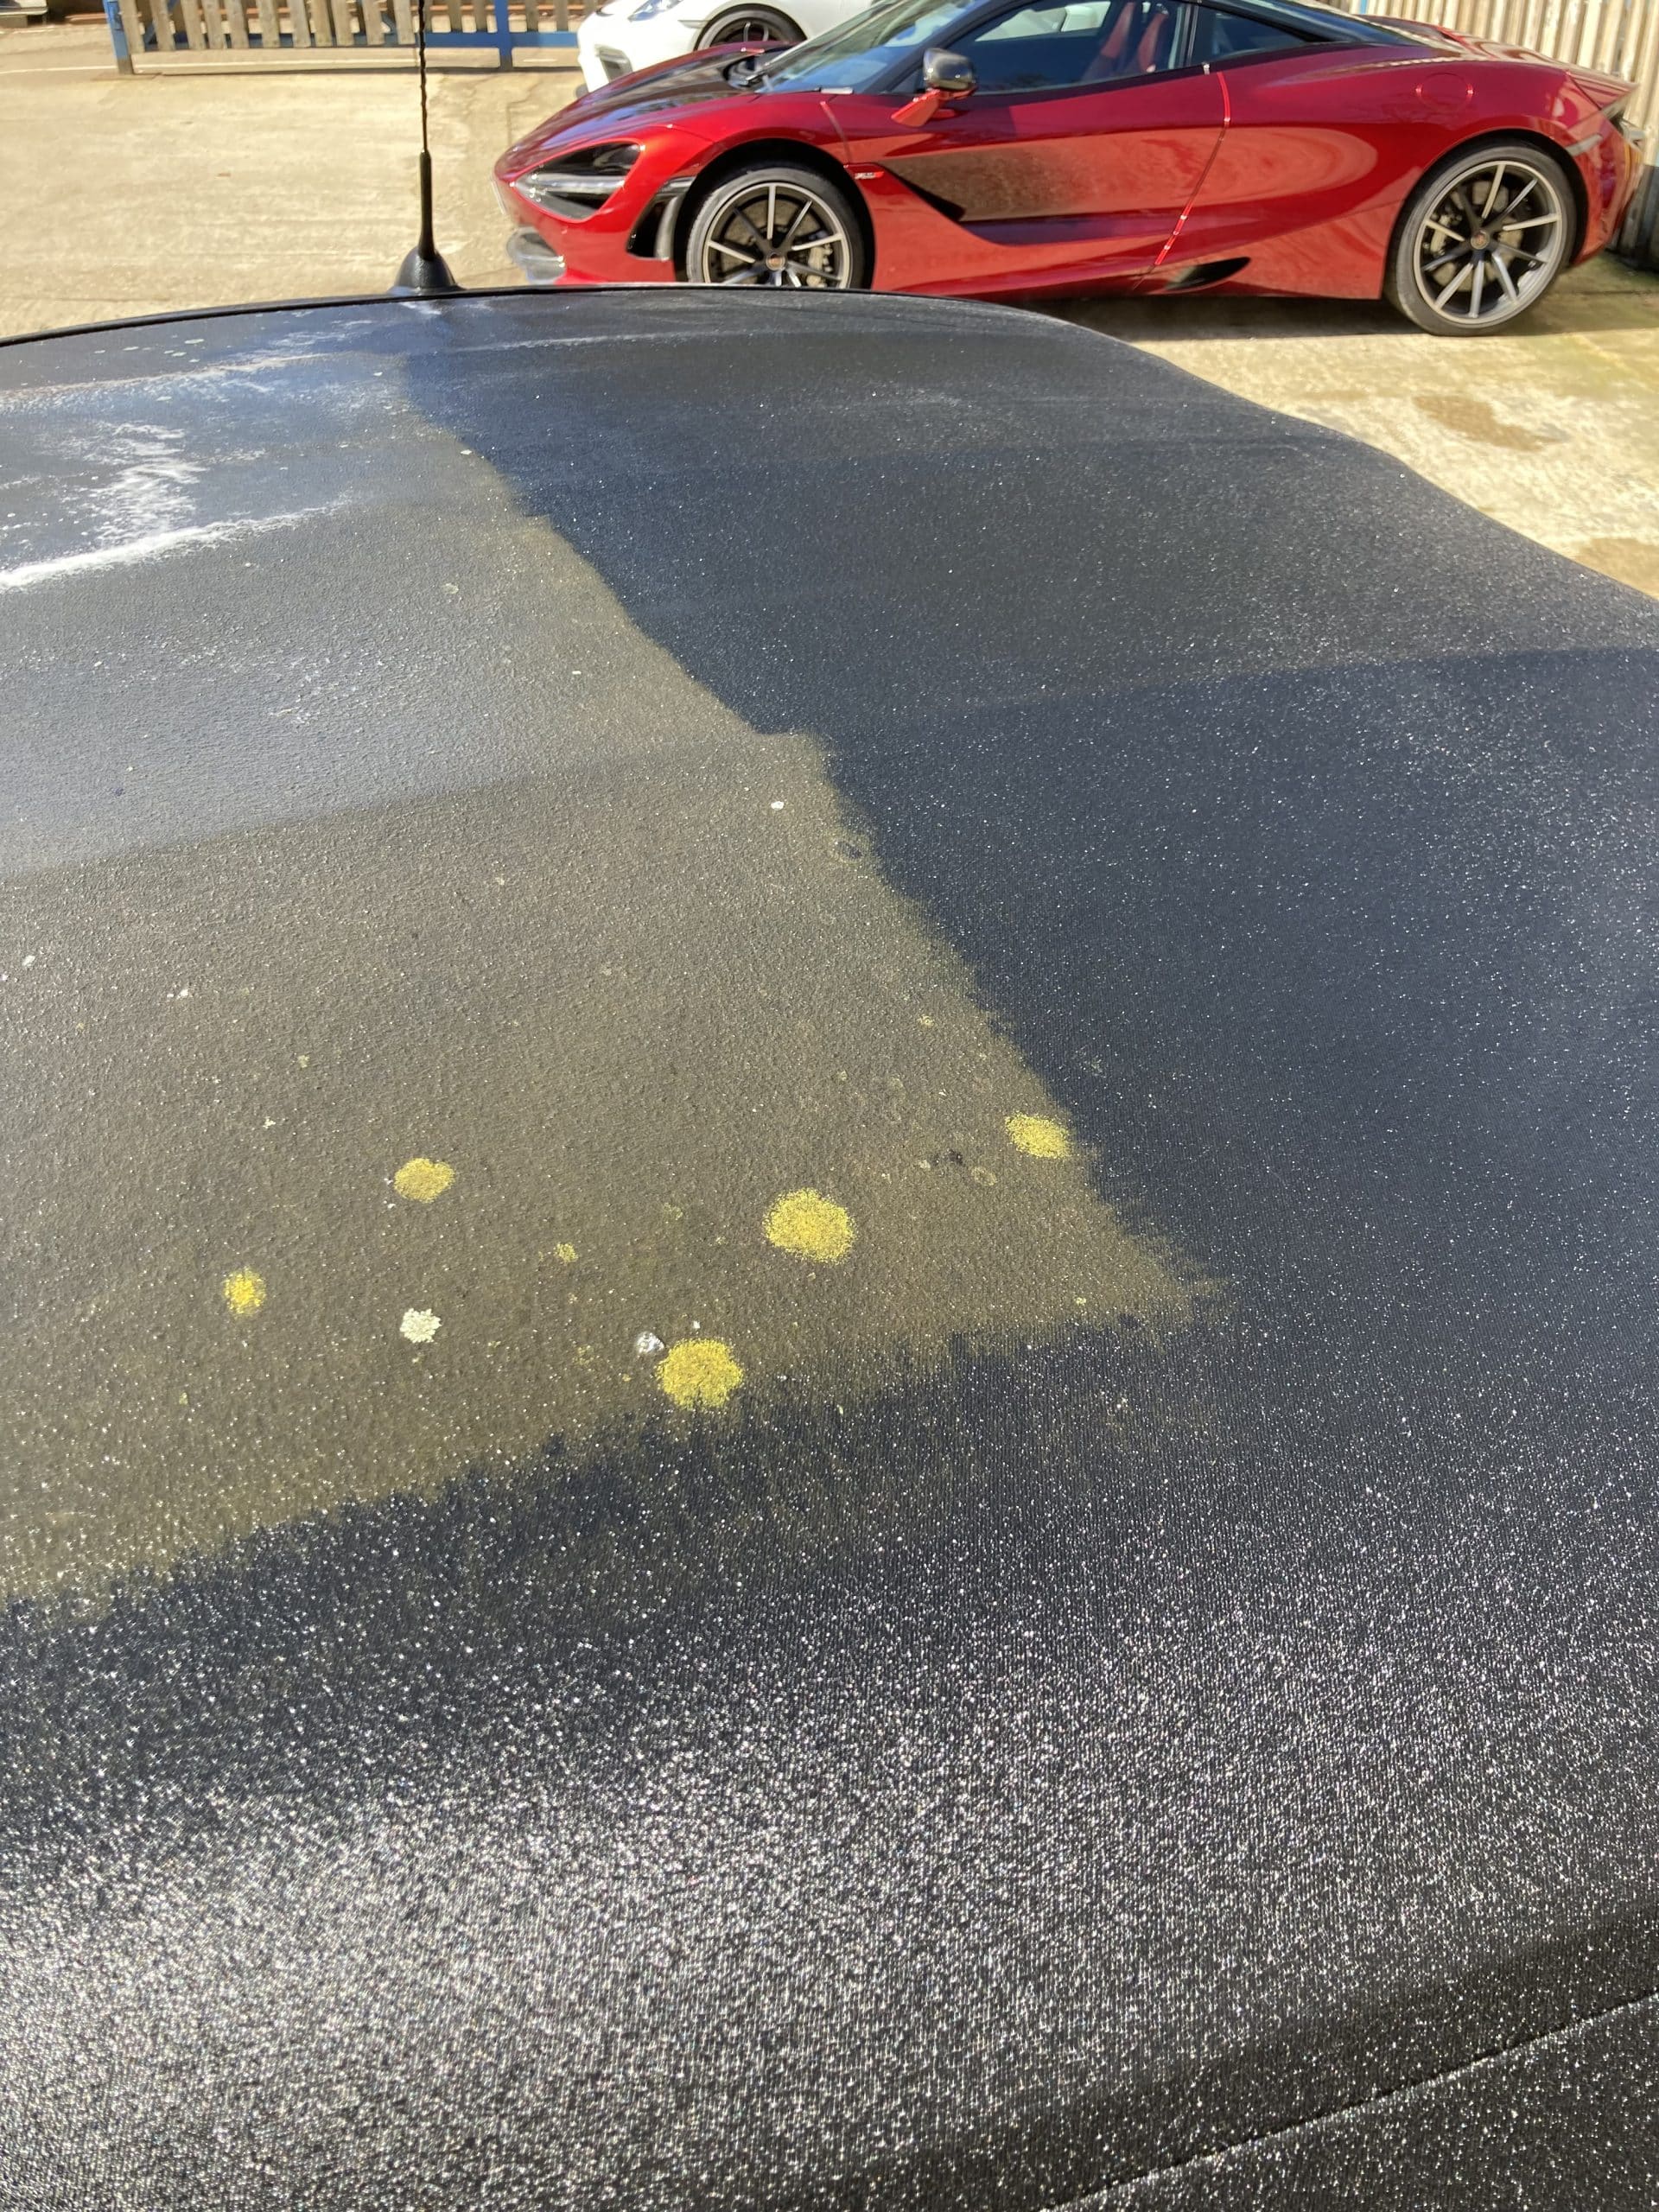 The image shows the roof of a black car with mossy or moldy spots on it. Parked next to it is a red sports car, highlighted by its spotless finish thanks to paint protection film.